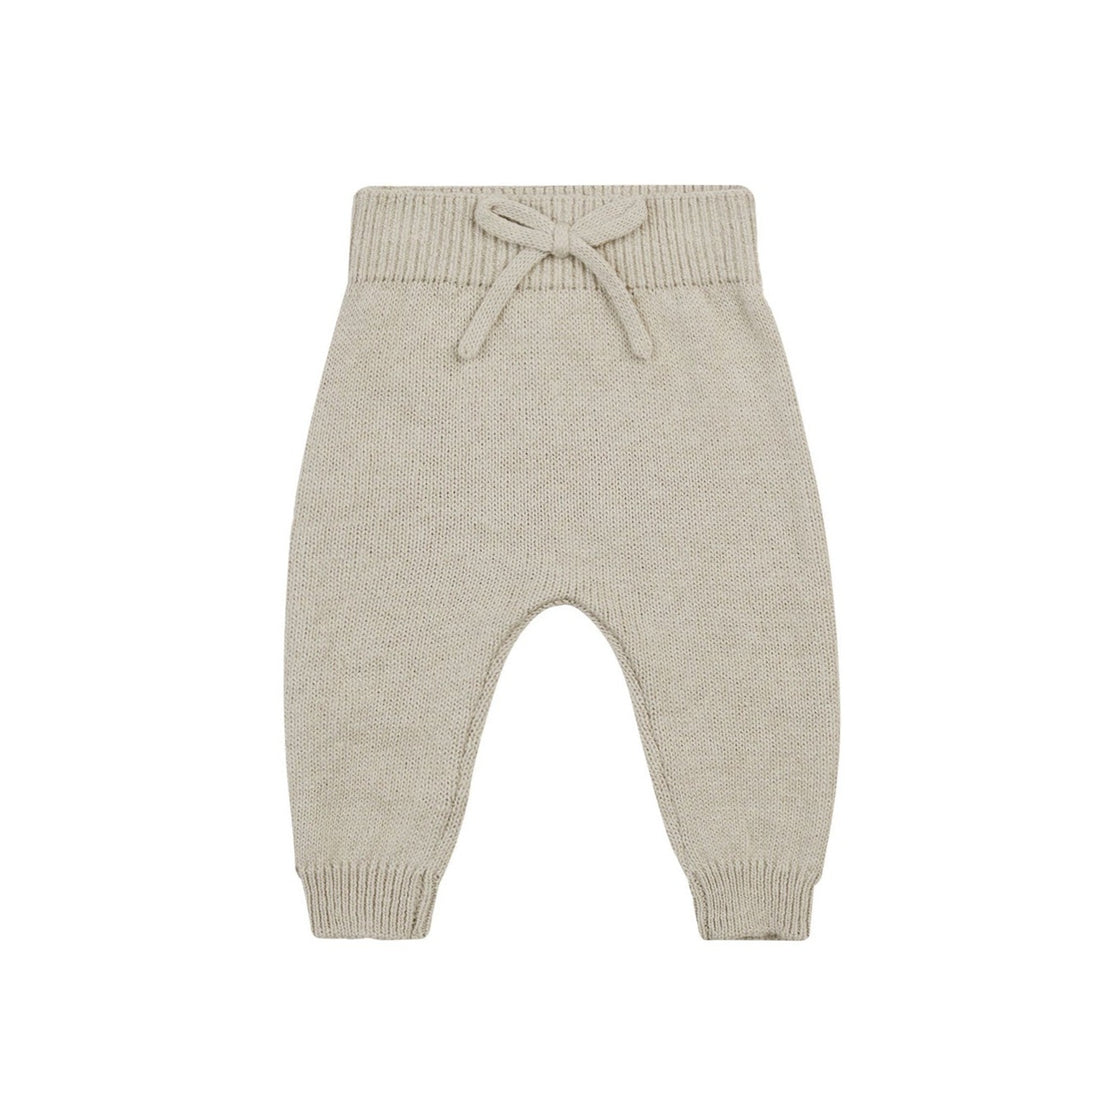 Quincy Mae Heathered Ash Knit Pant